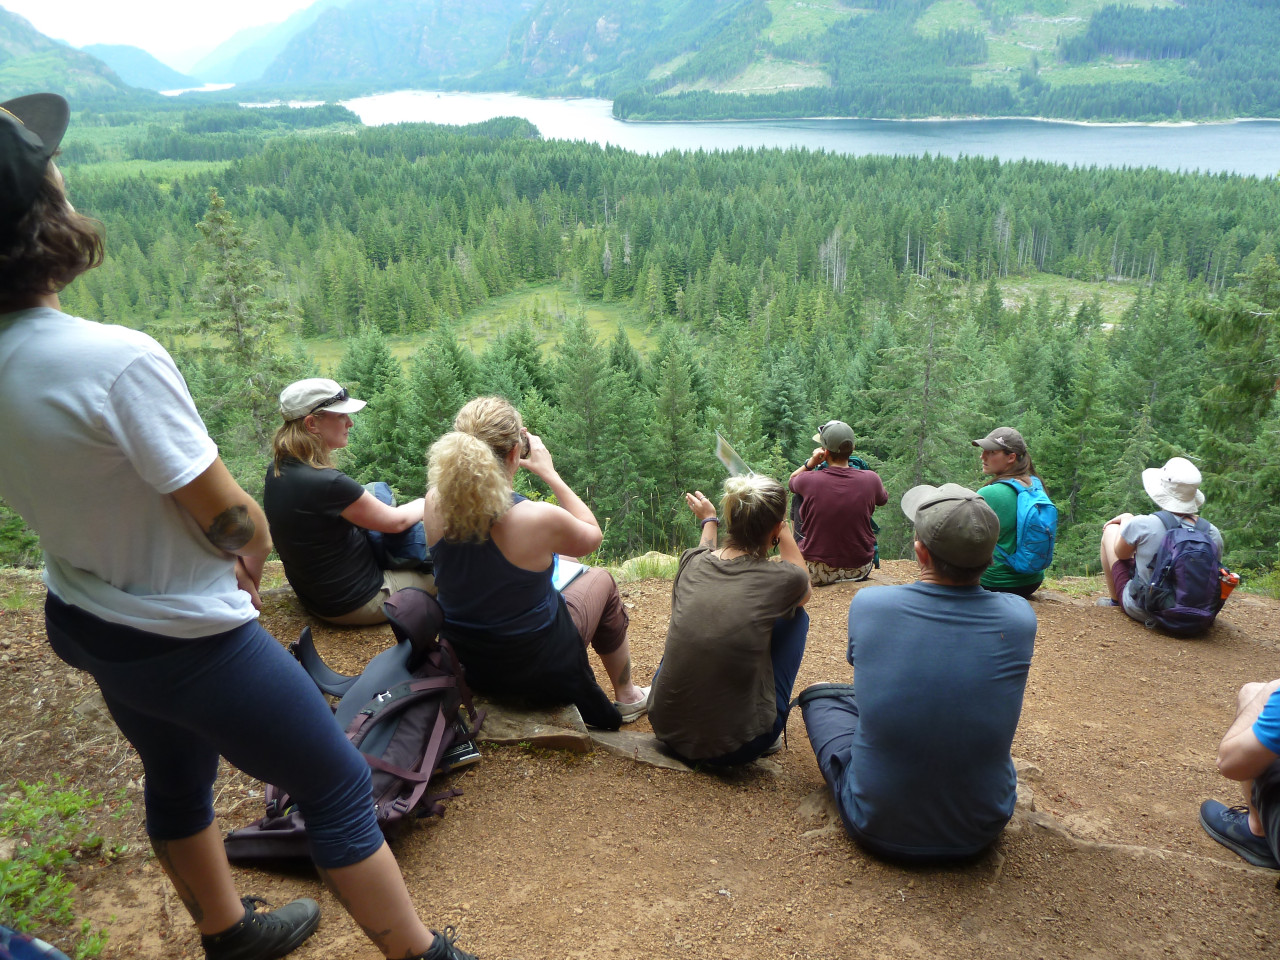 group of adventure education students on mountain hike overlooking view of lake and forest